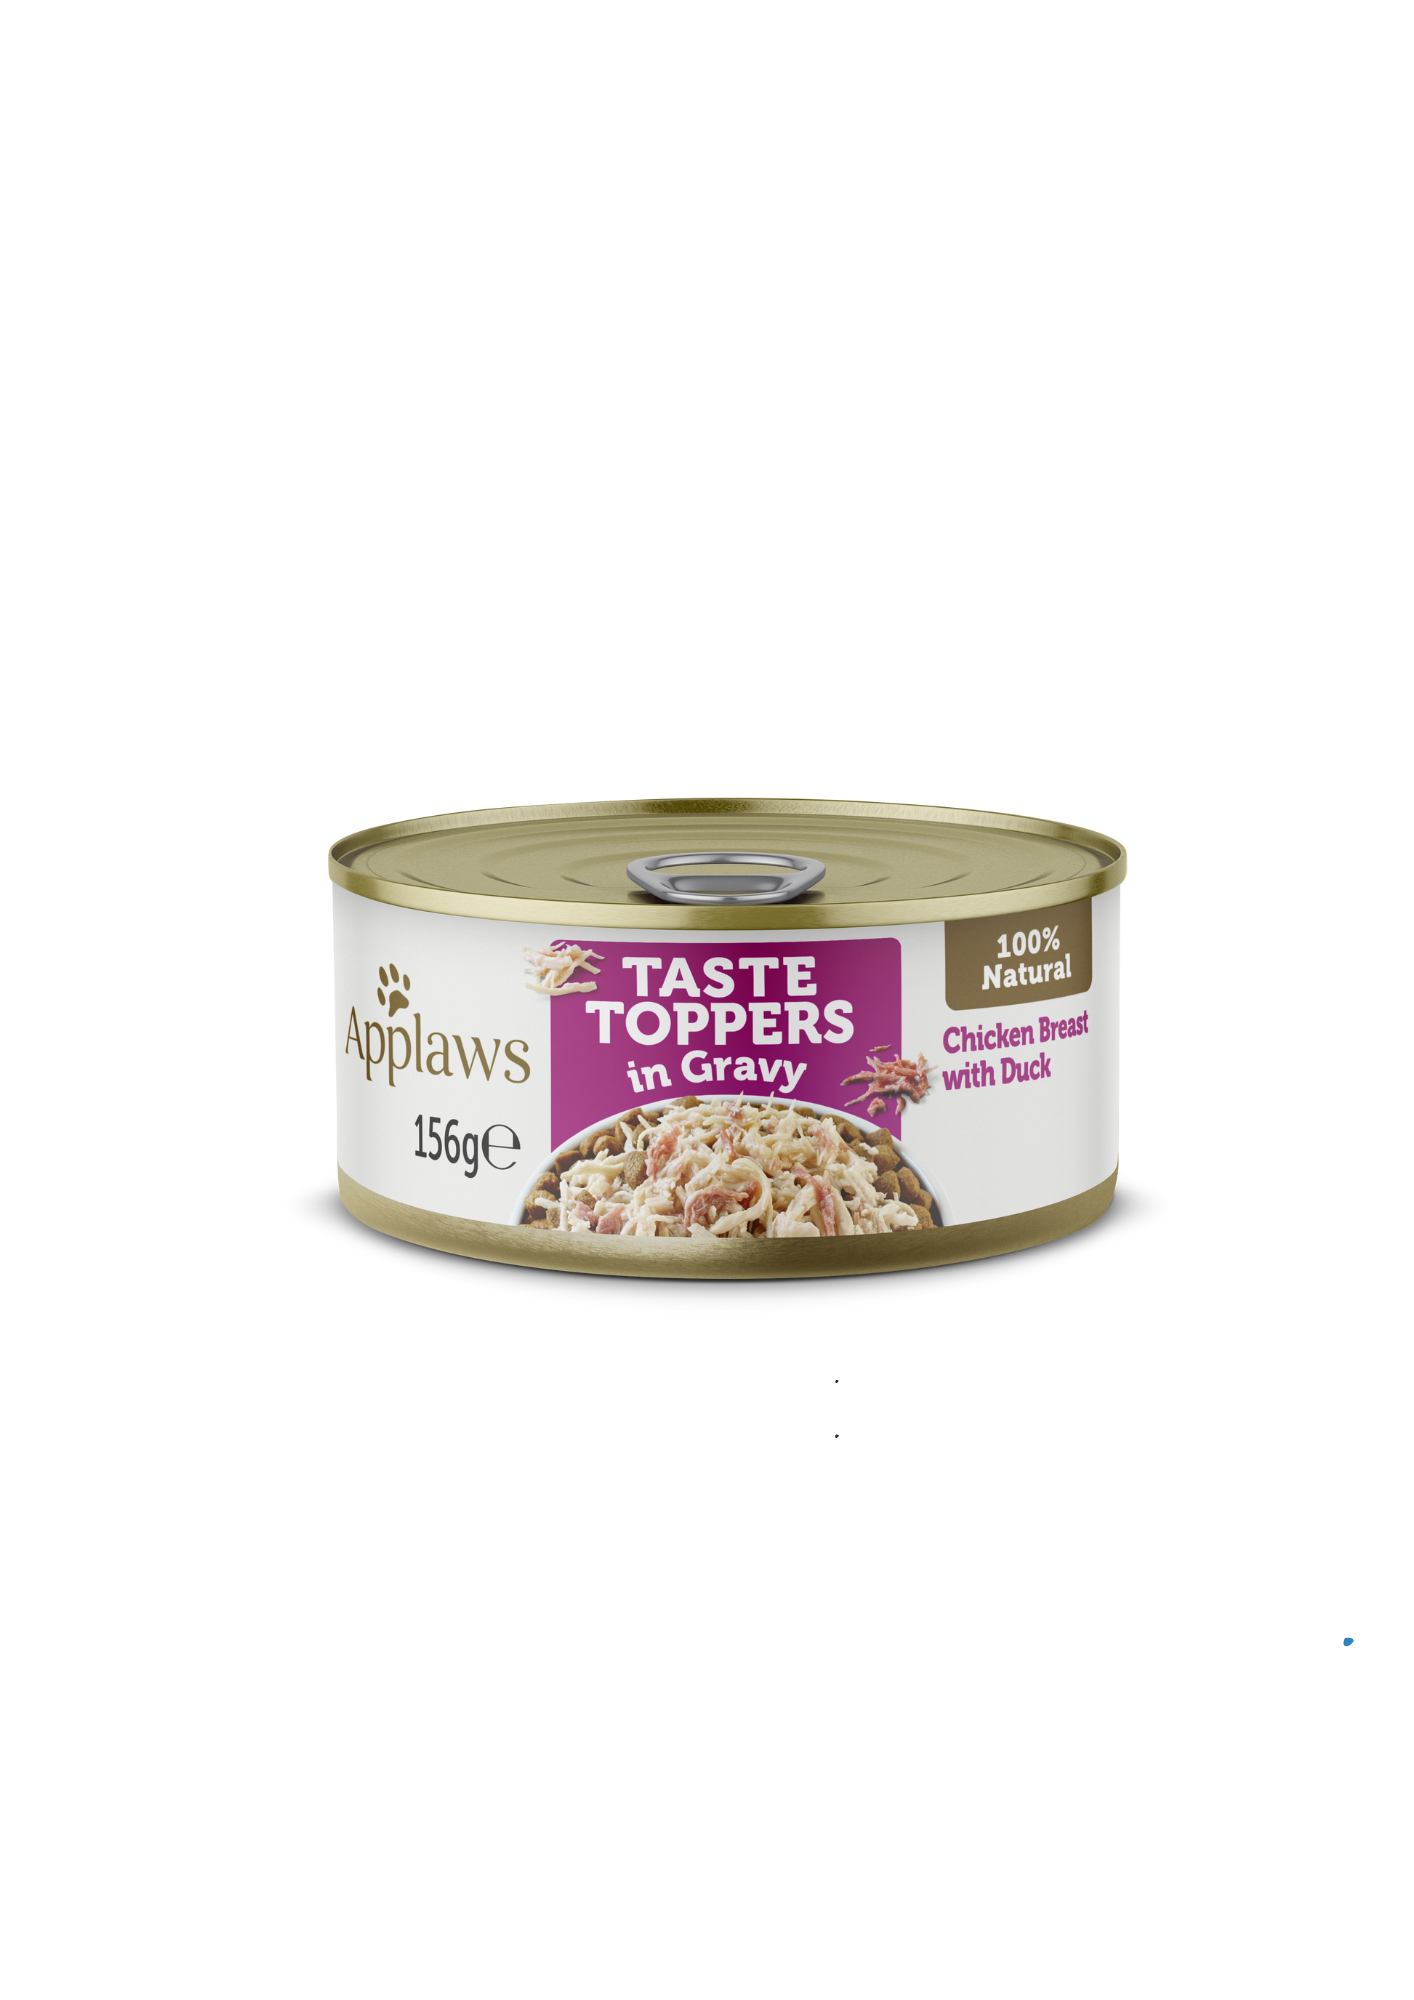 Applaws Taste Toppers in Gravy Chicken Breast with Duck, 100% Natural Complements Dry Dog Food, 156 g